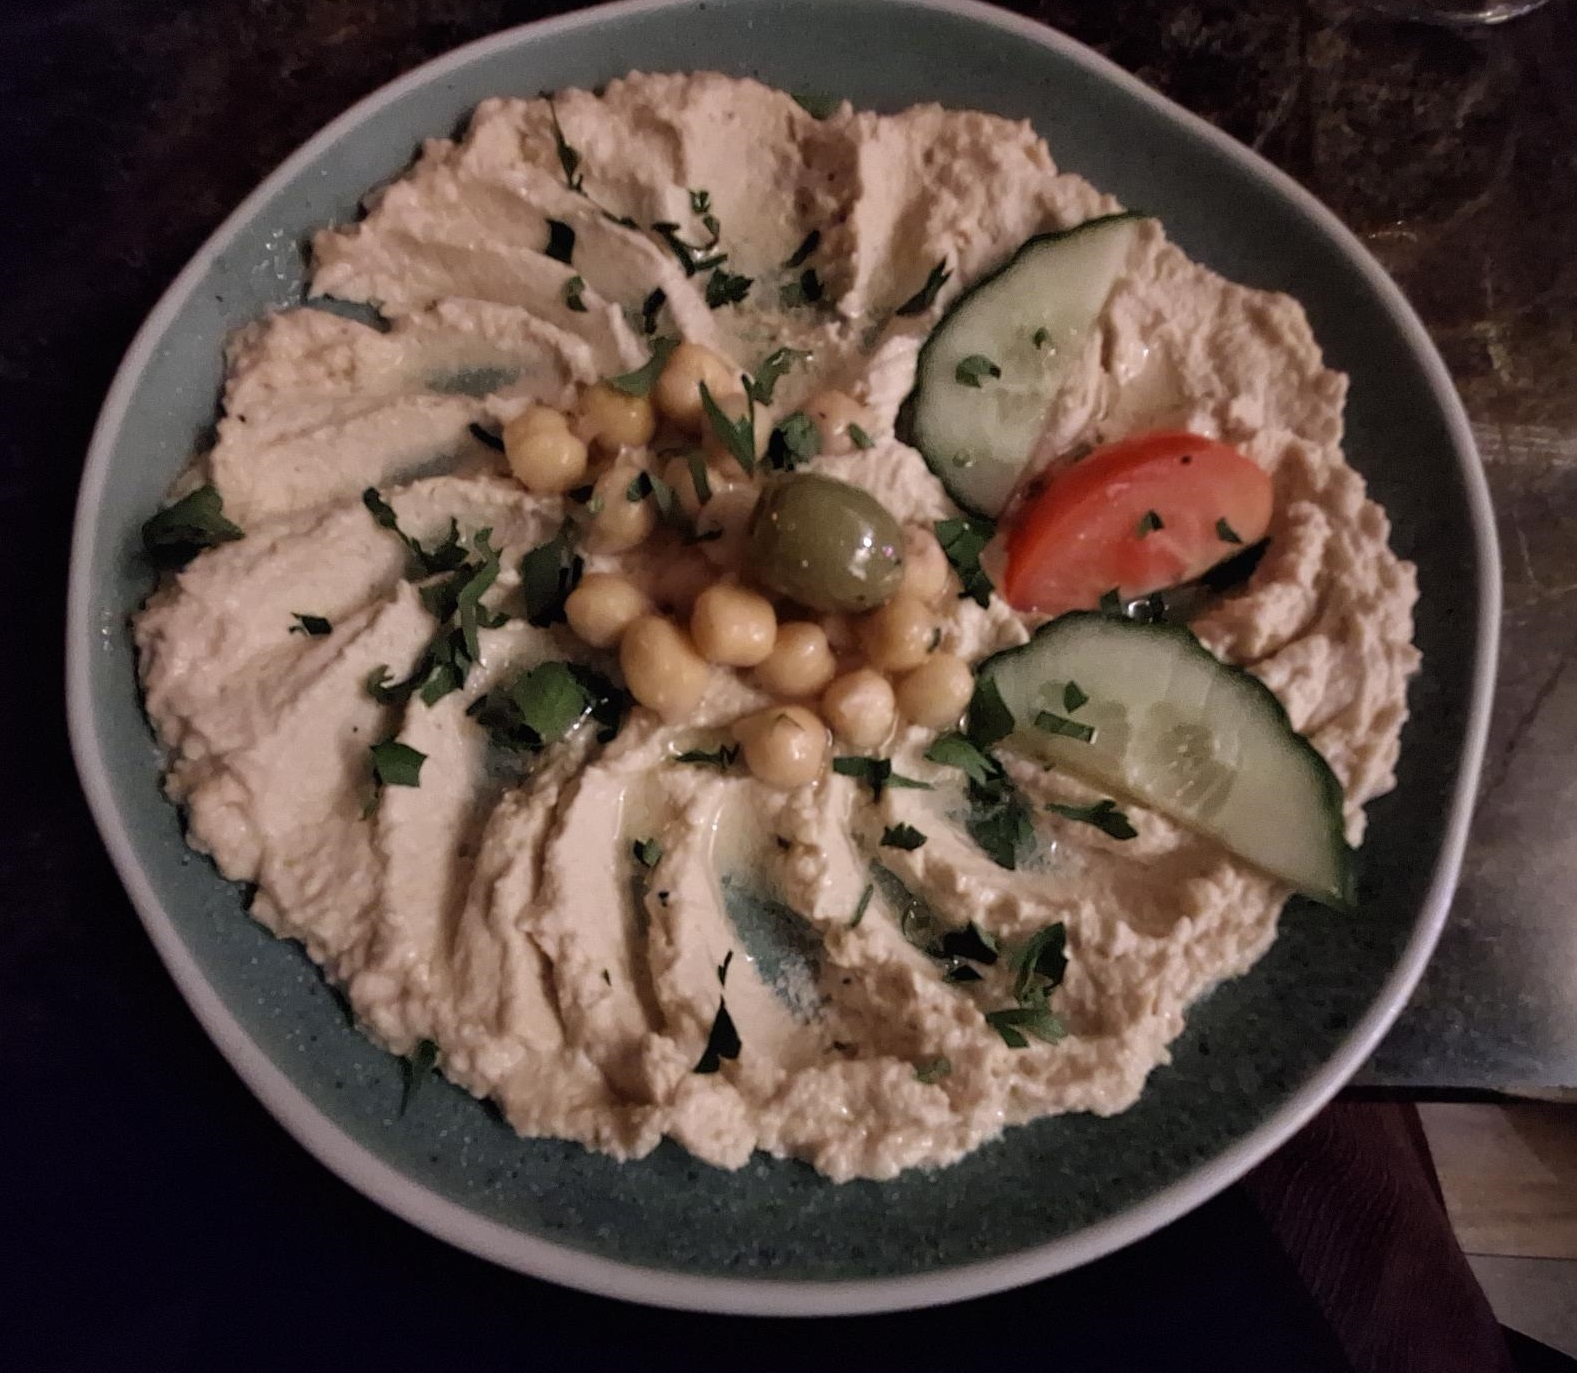 Houmous starter was a good-sized portion